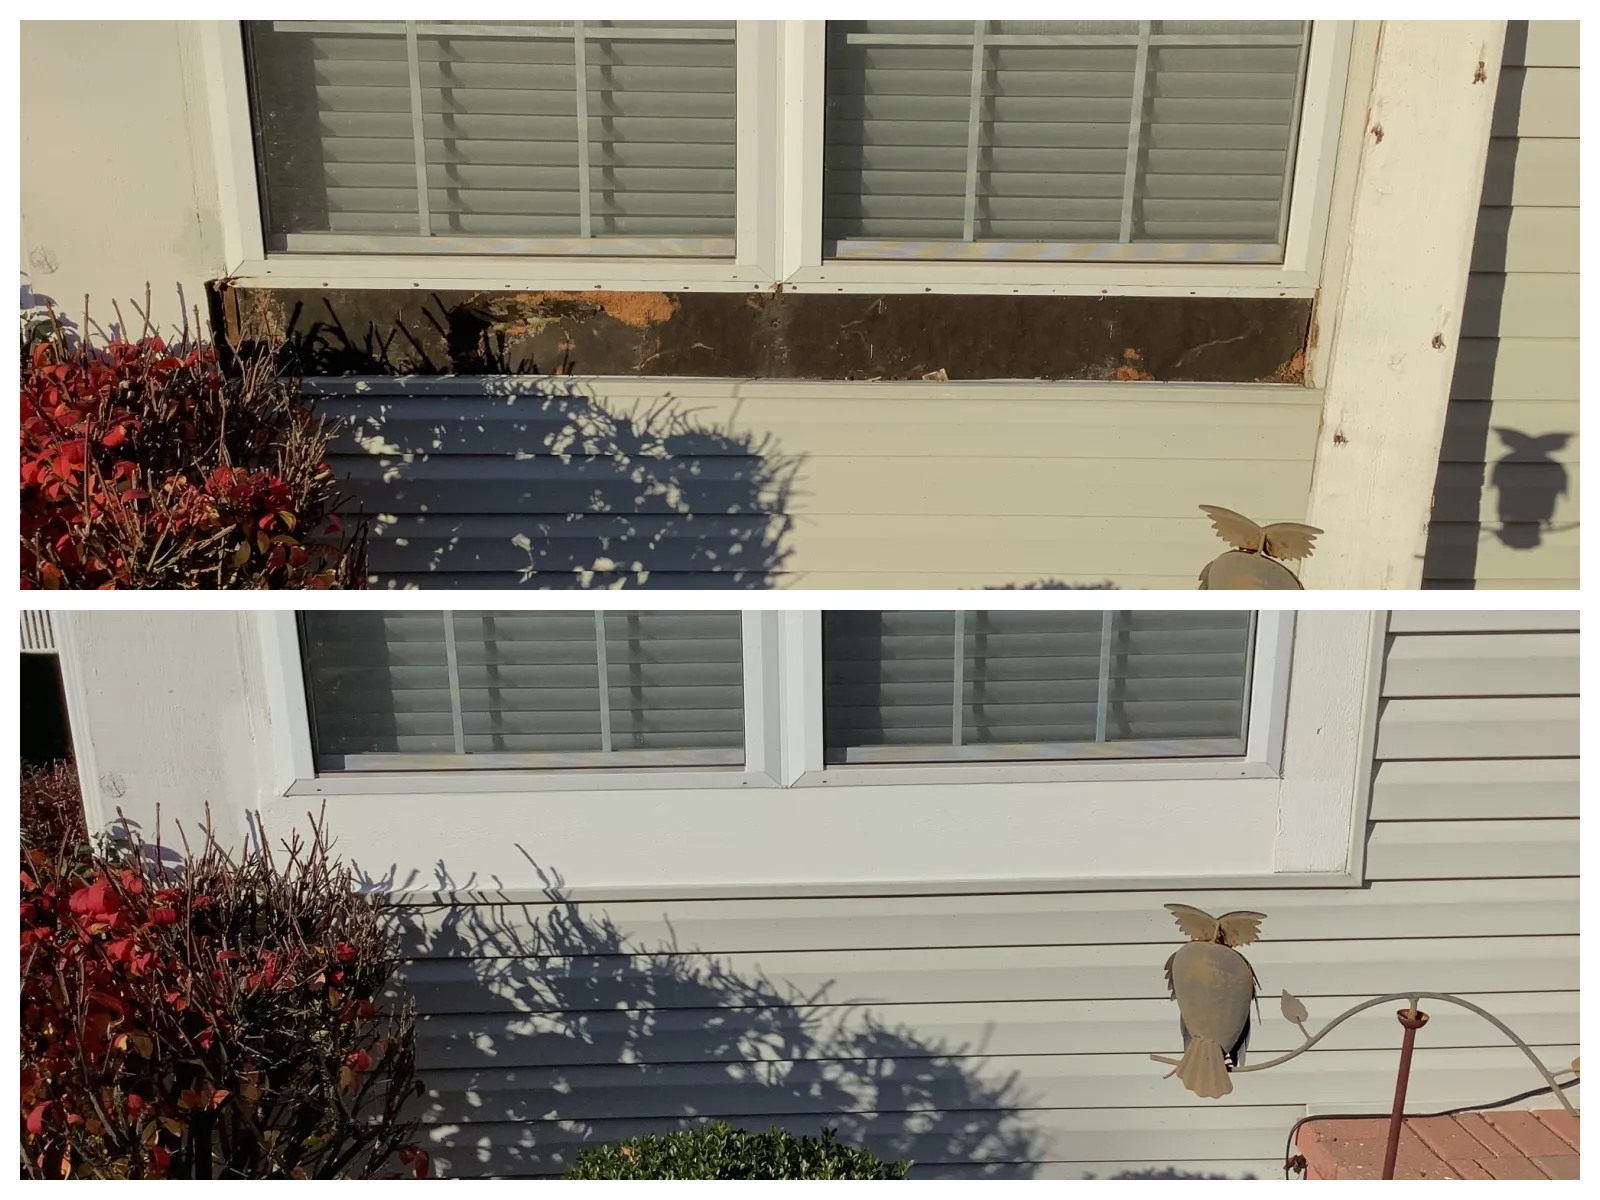 The client’s damaged exterior bottom window frame has been removed and replaced with a brand-new trim board during trim repair in Wheaton, IL